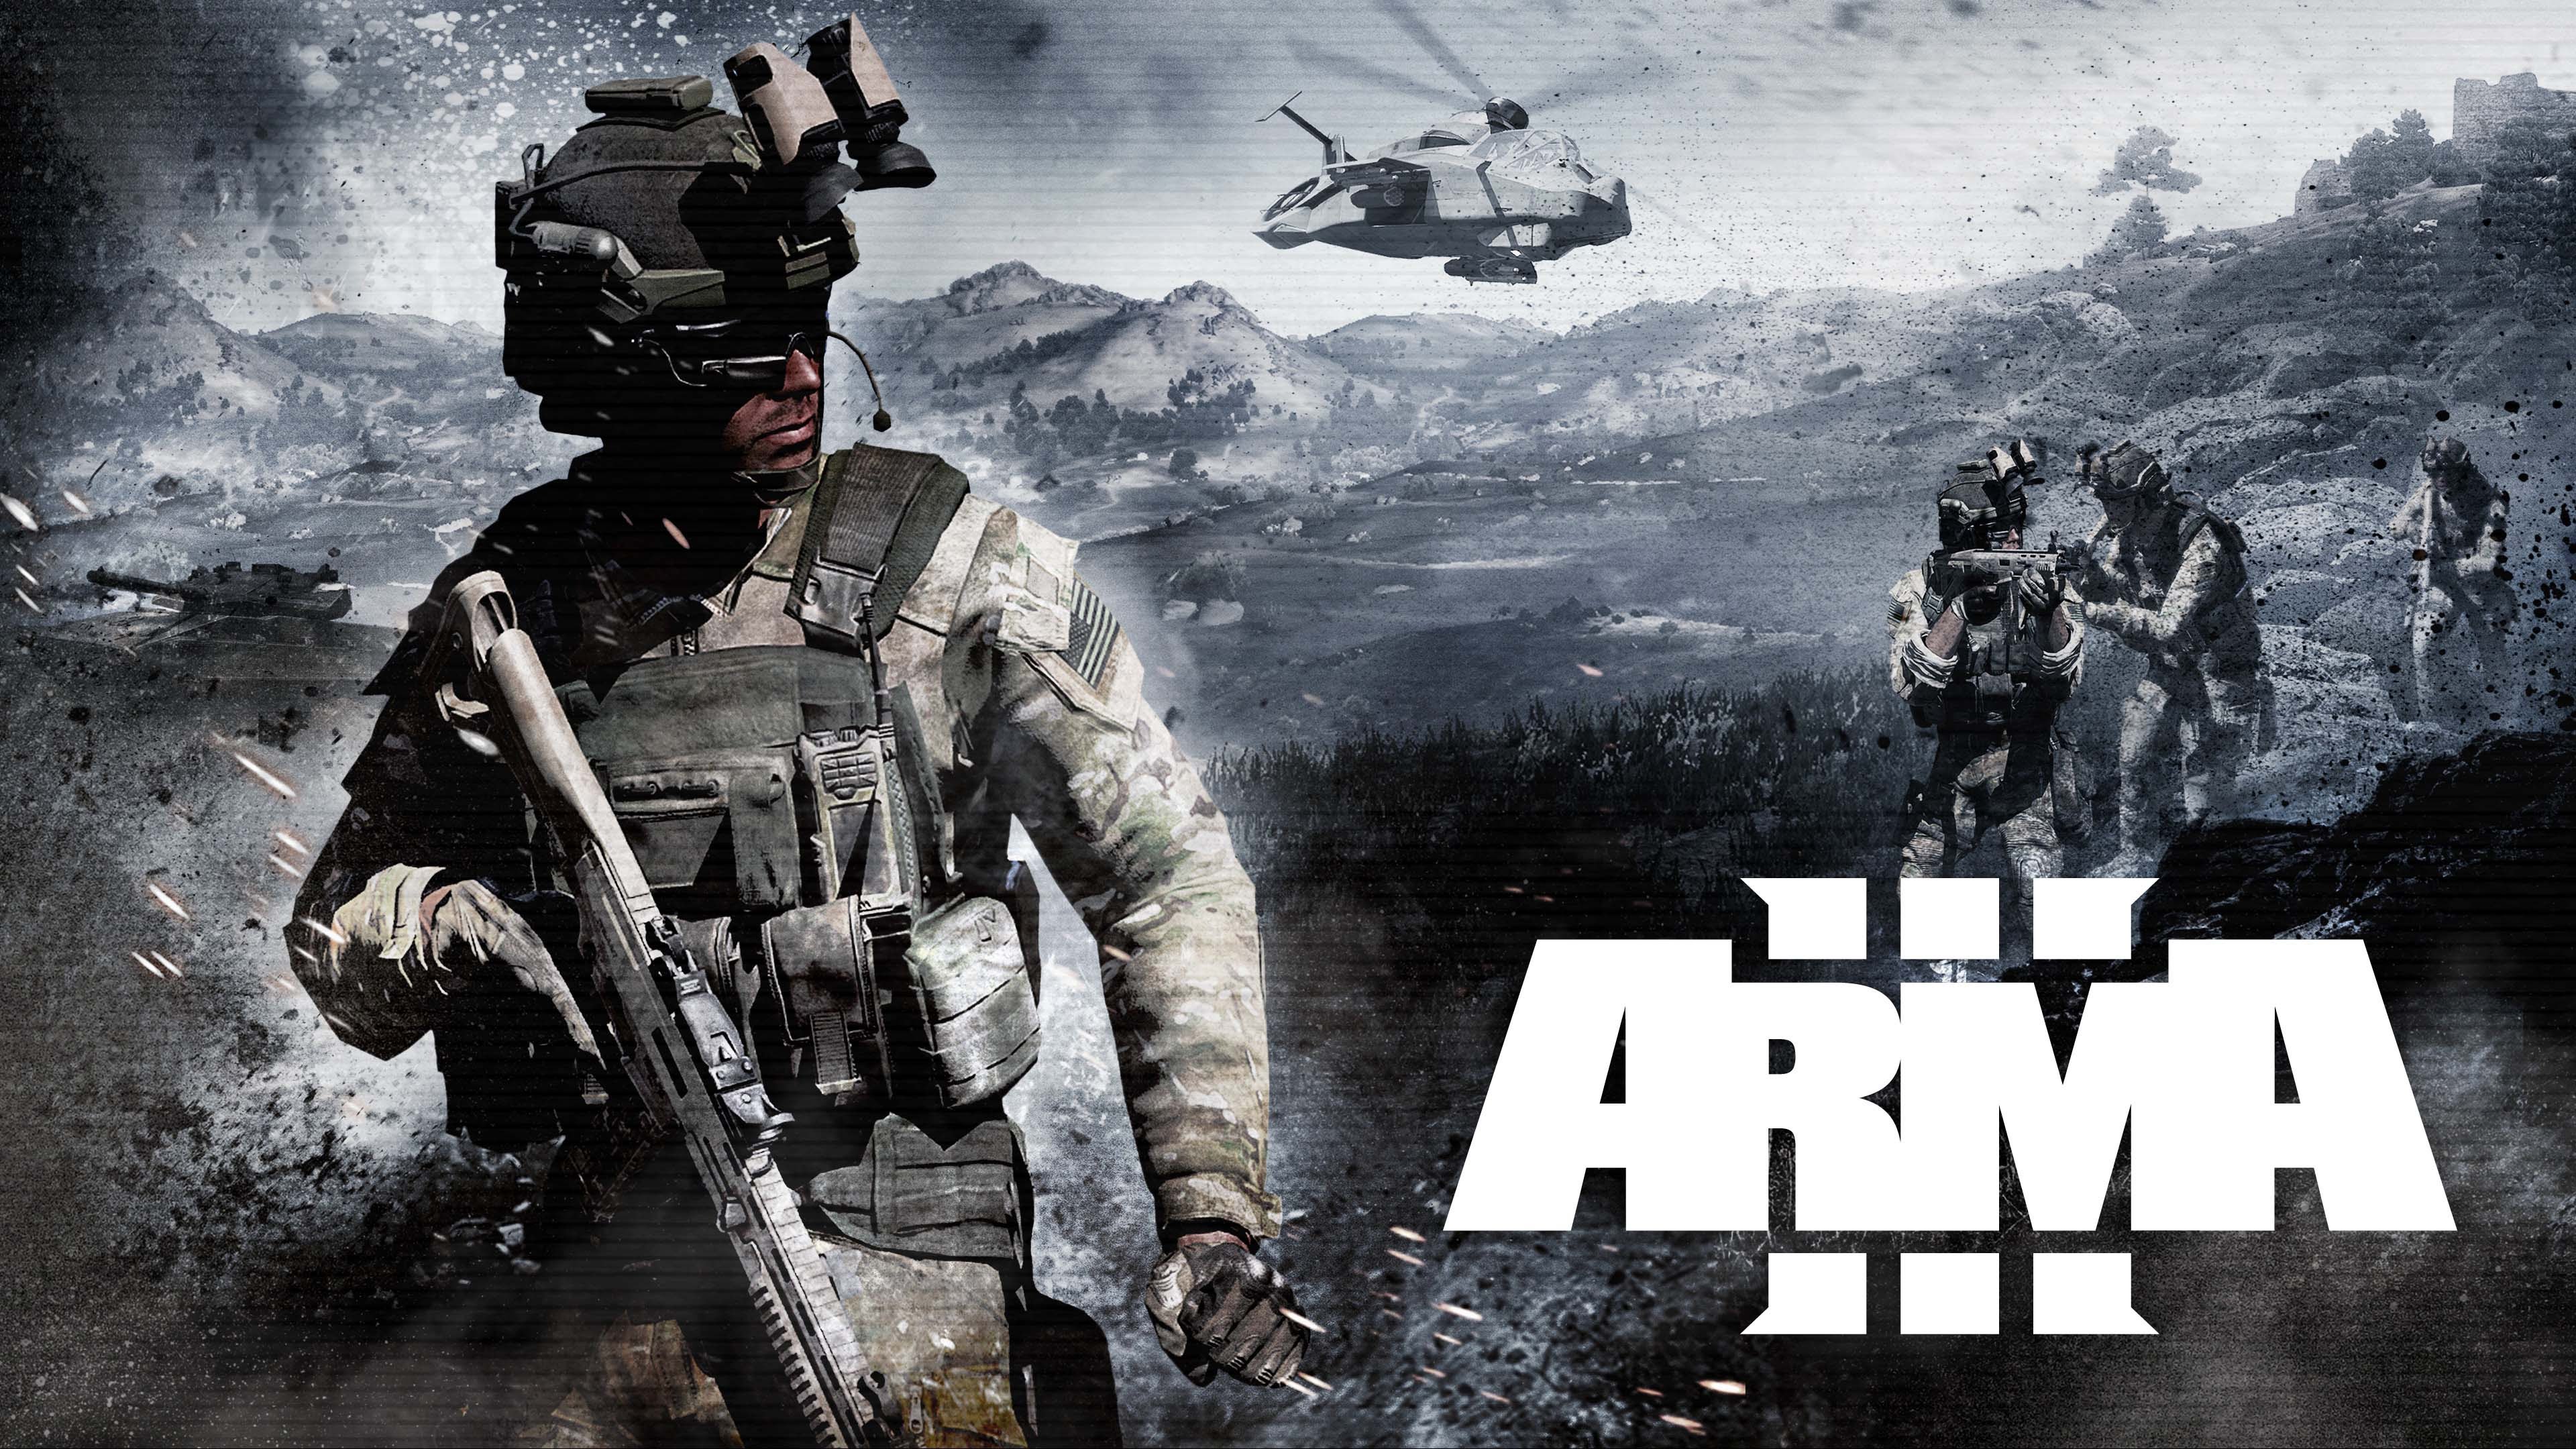 download arma 4 reforger